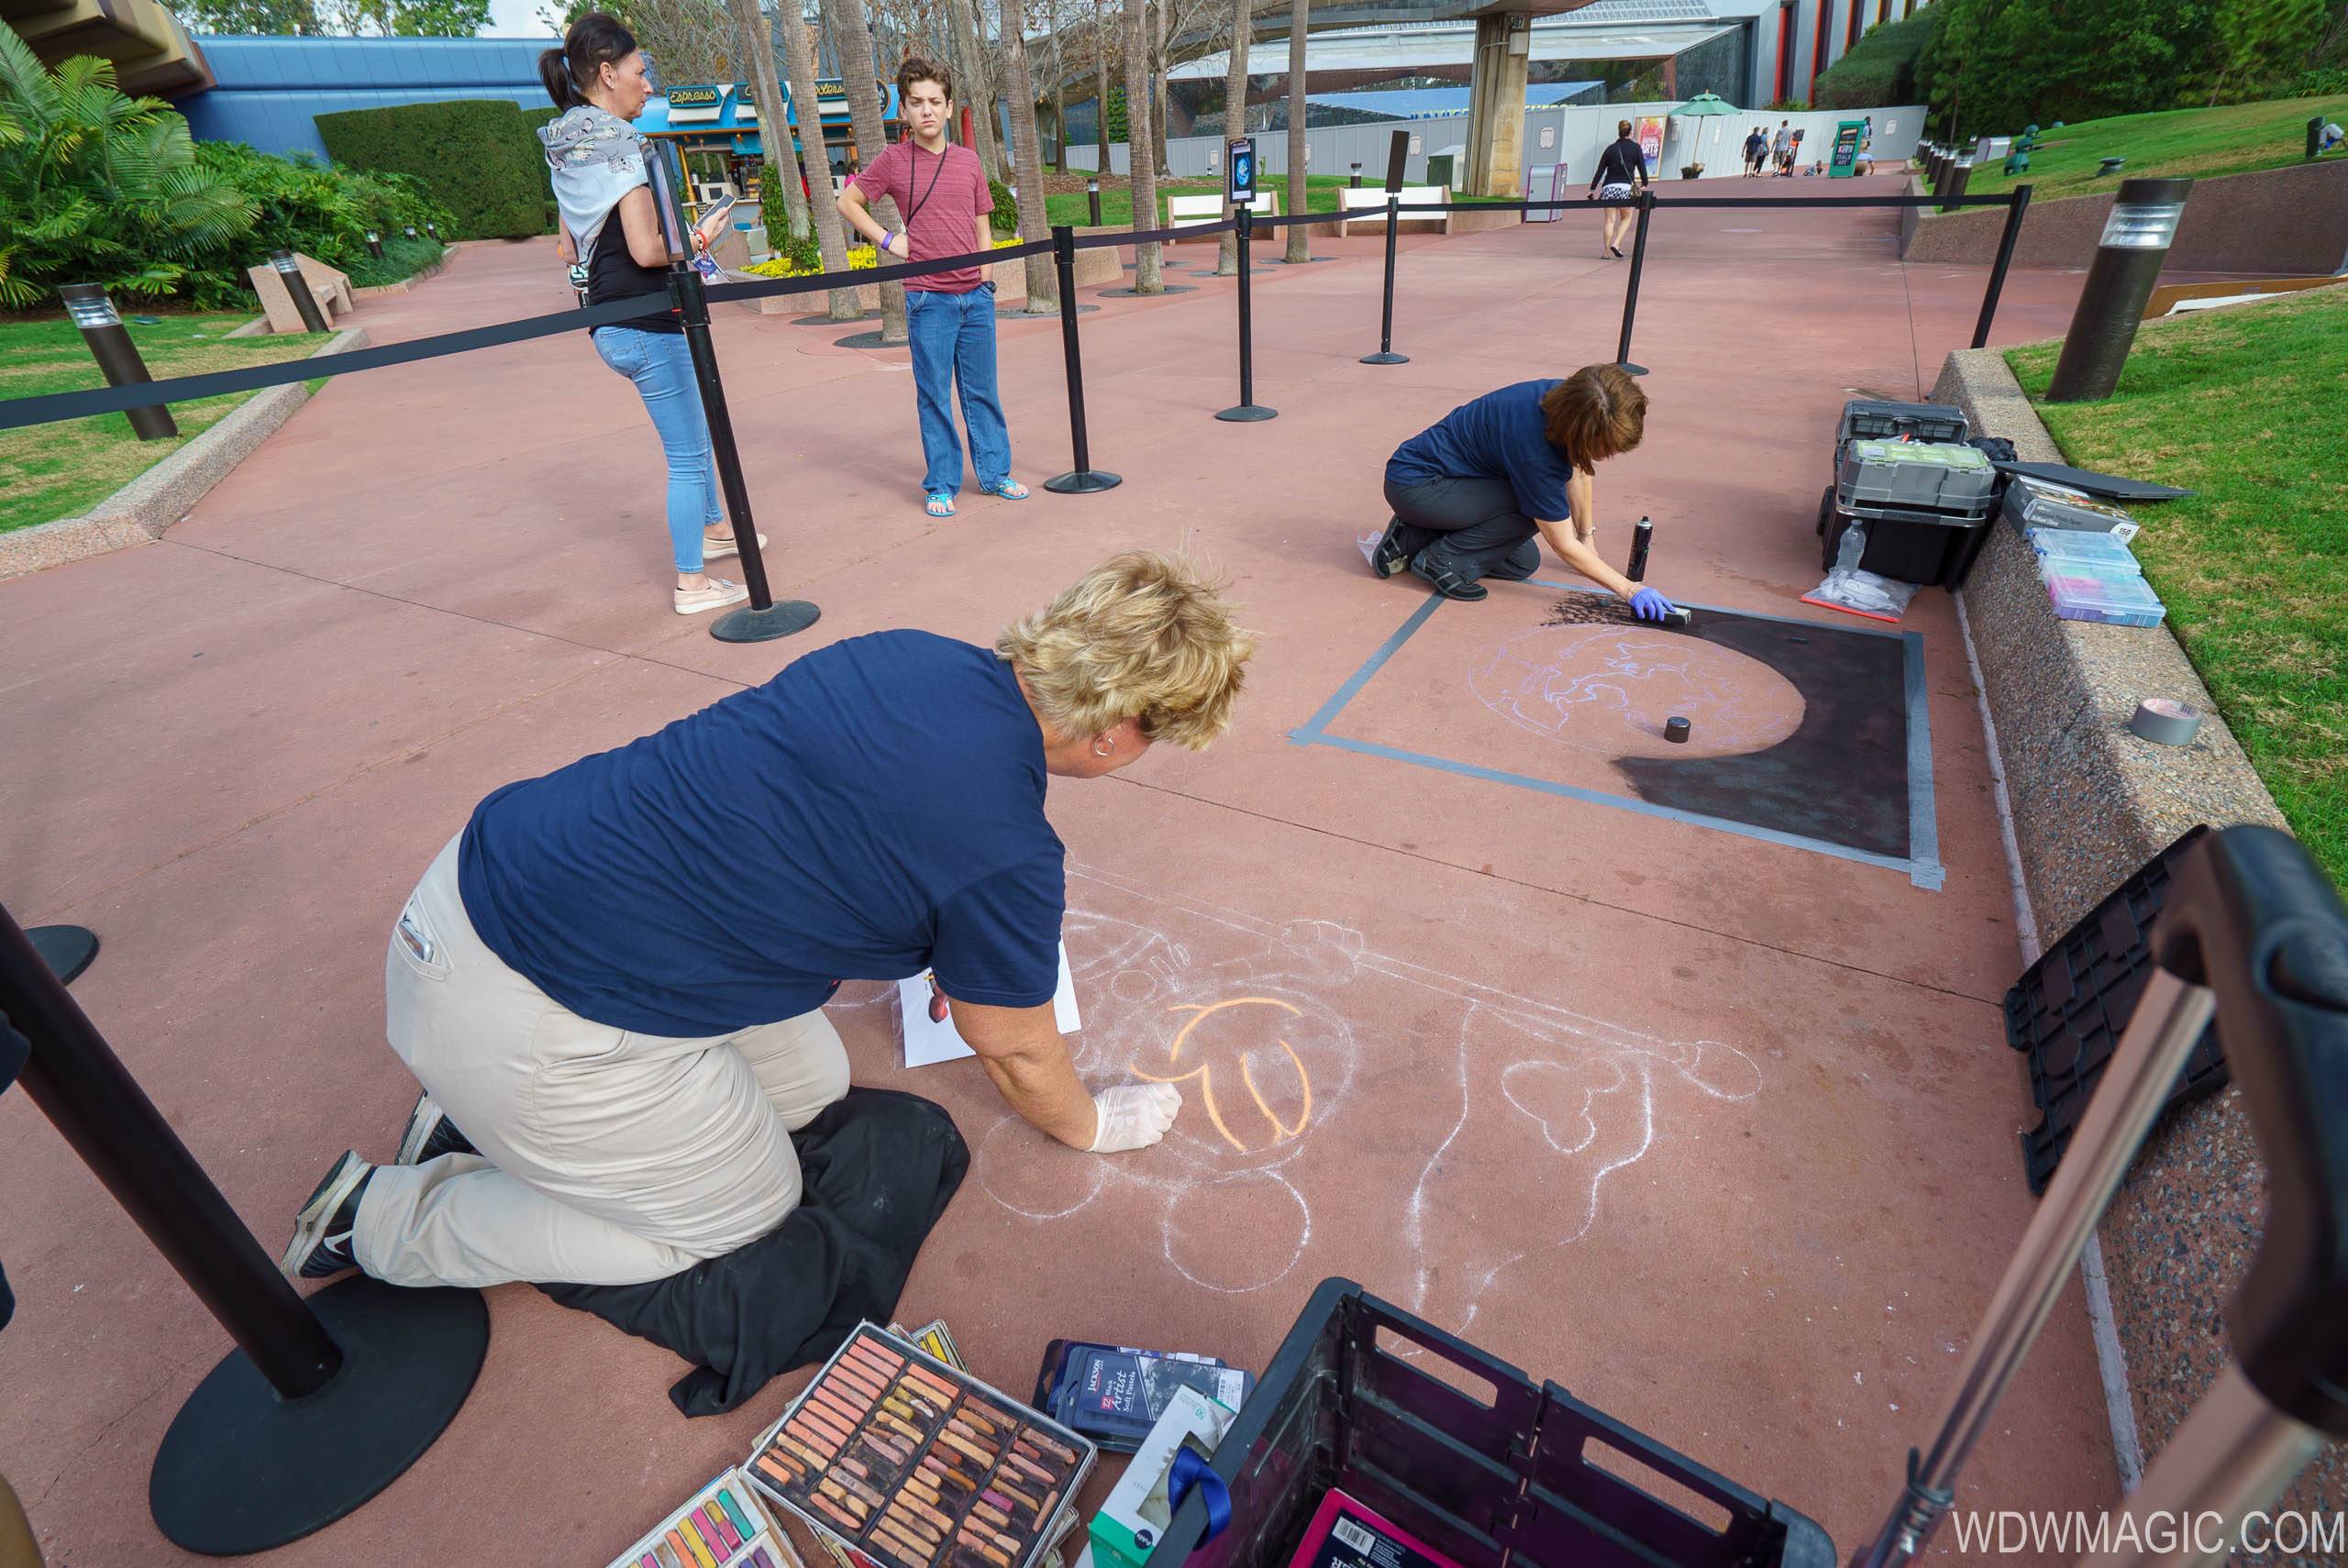 Opening day at the 2018 Epcot International Festival of the Arts